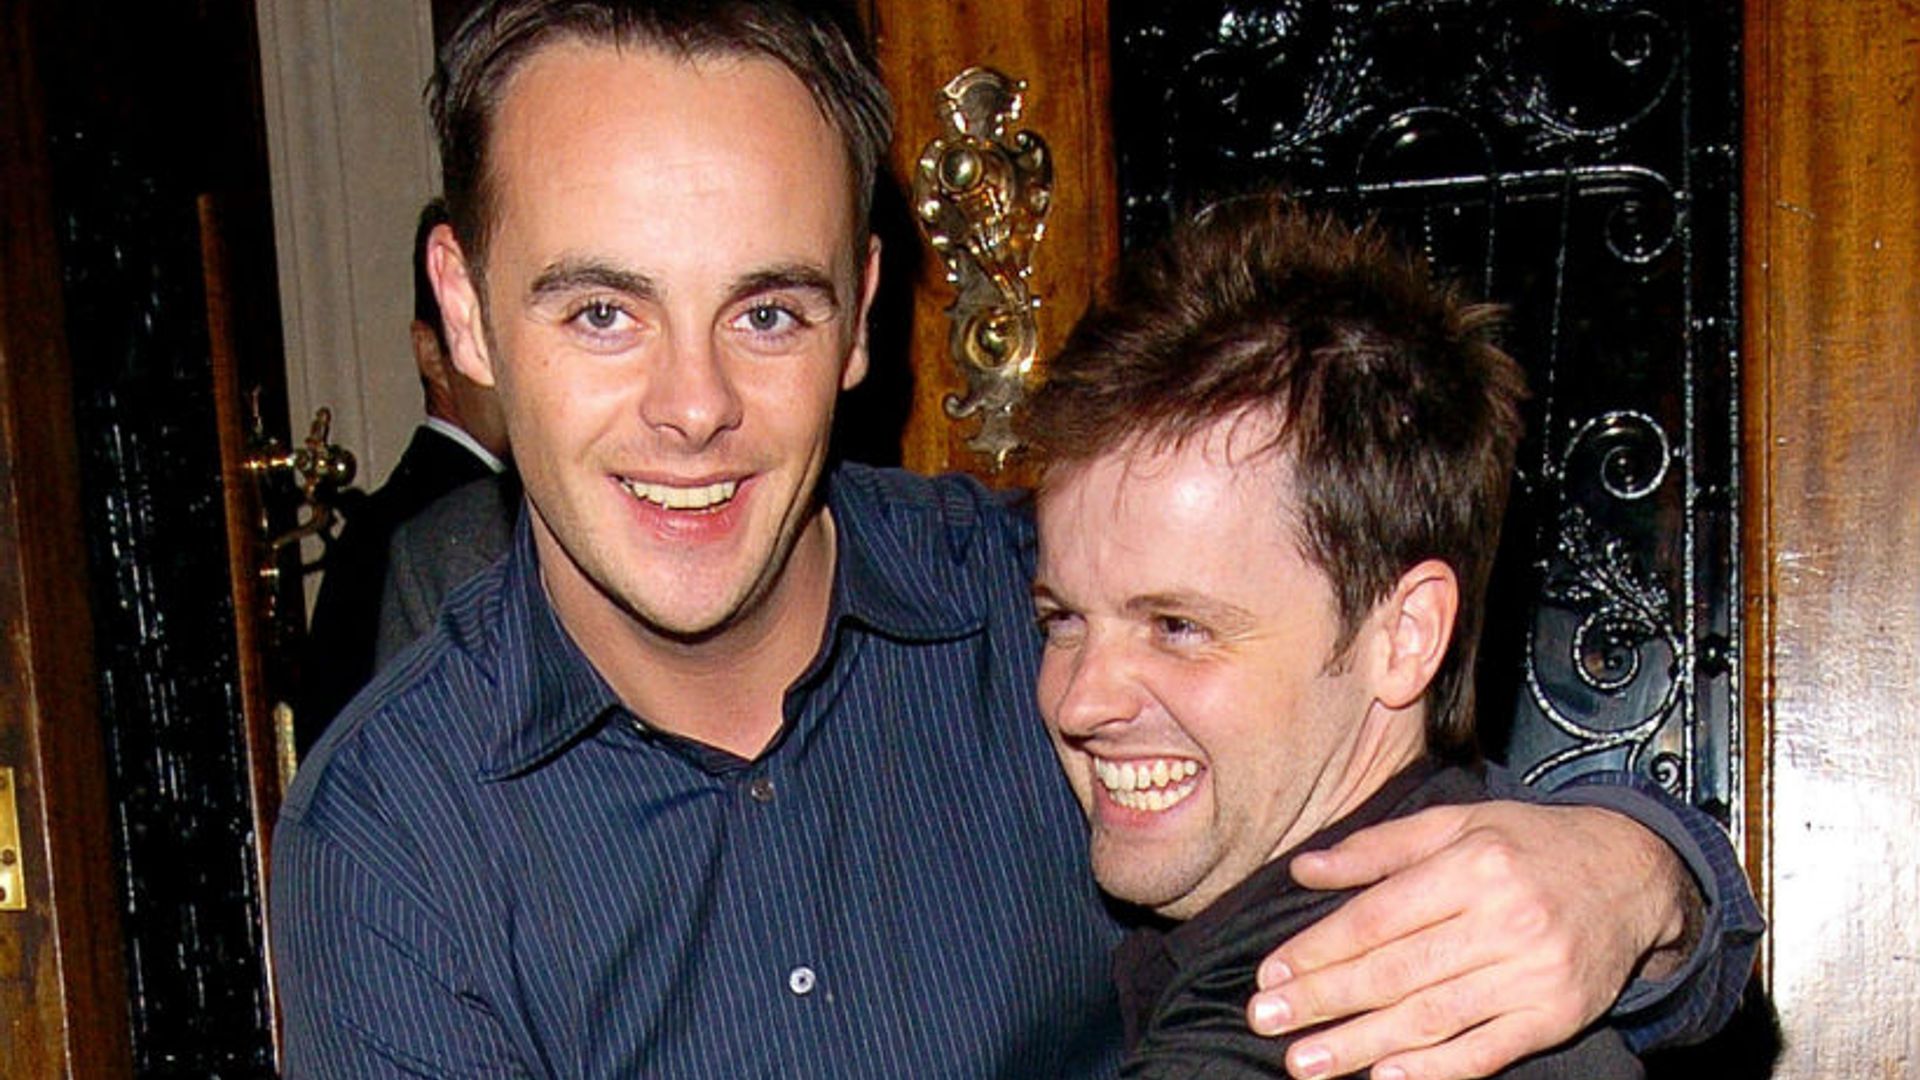 'Uncle Ant' shares rare social media post dedicated to Dec's baby